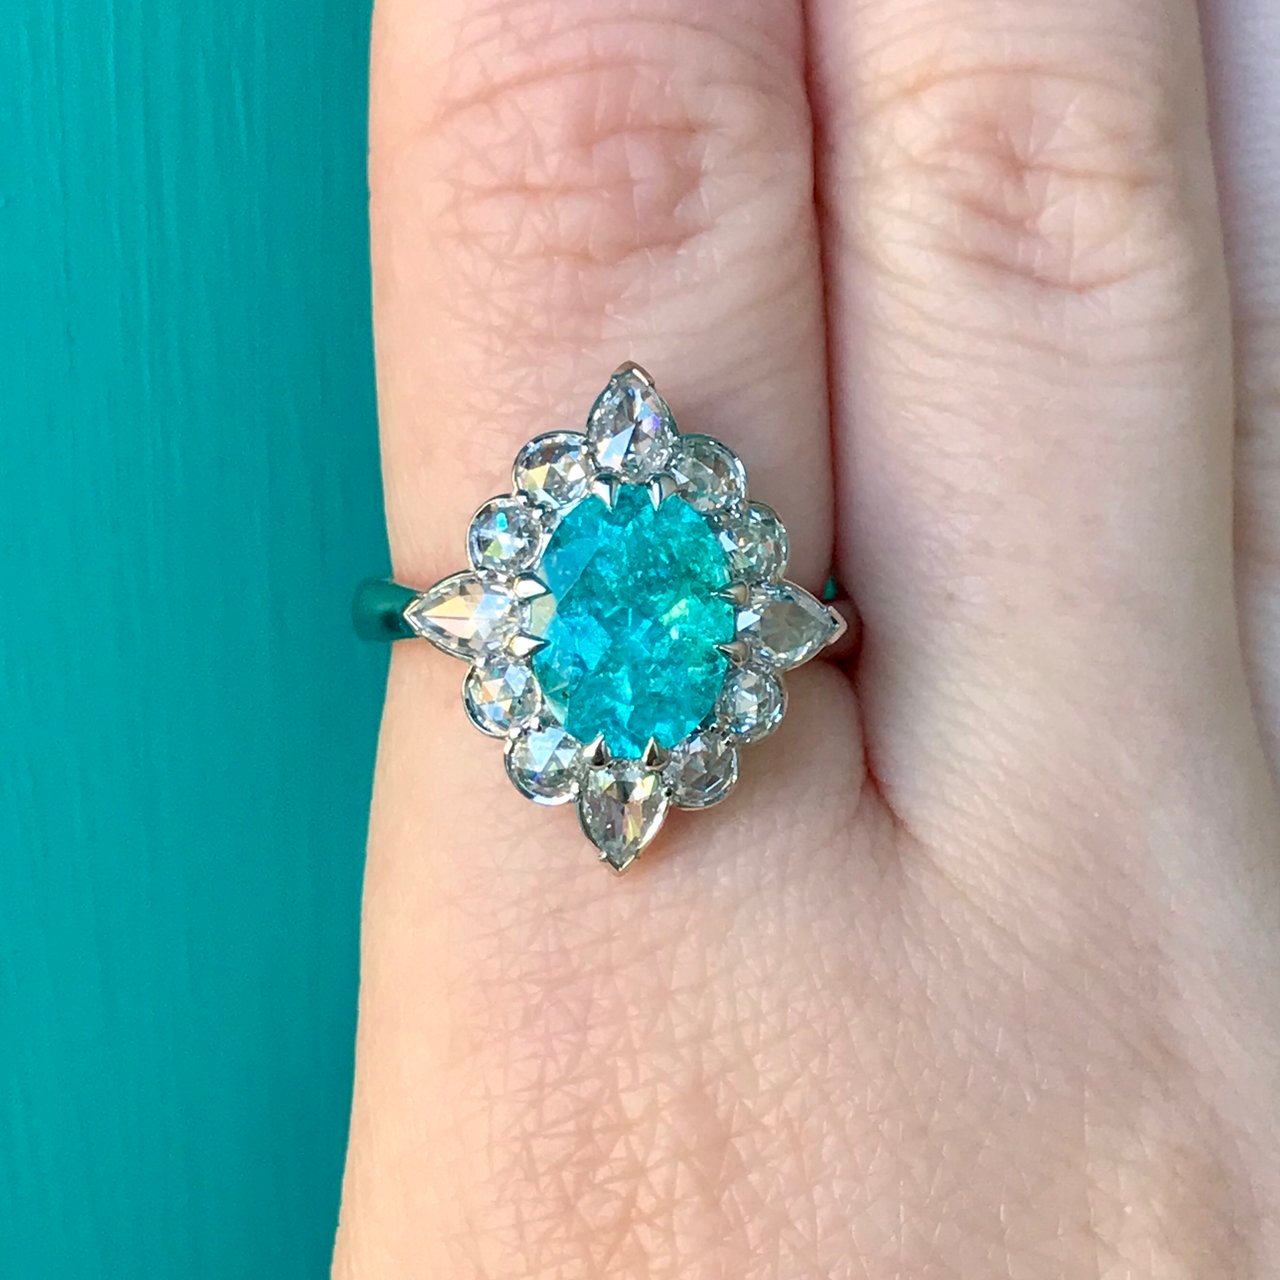 Distracts posted this phenomenally beautiful Paraiba in rose cut halo ring on the Show Me the Bling forum at PriceScope.  I can’t stop looking at it, it’s so pretty! I am head over heals for the color and shapes in this stunner. TDF!